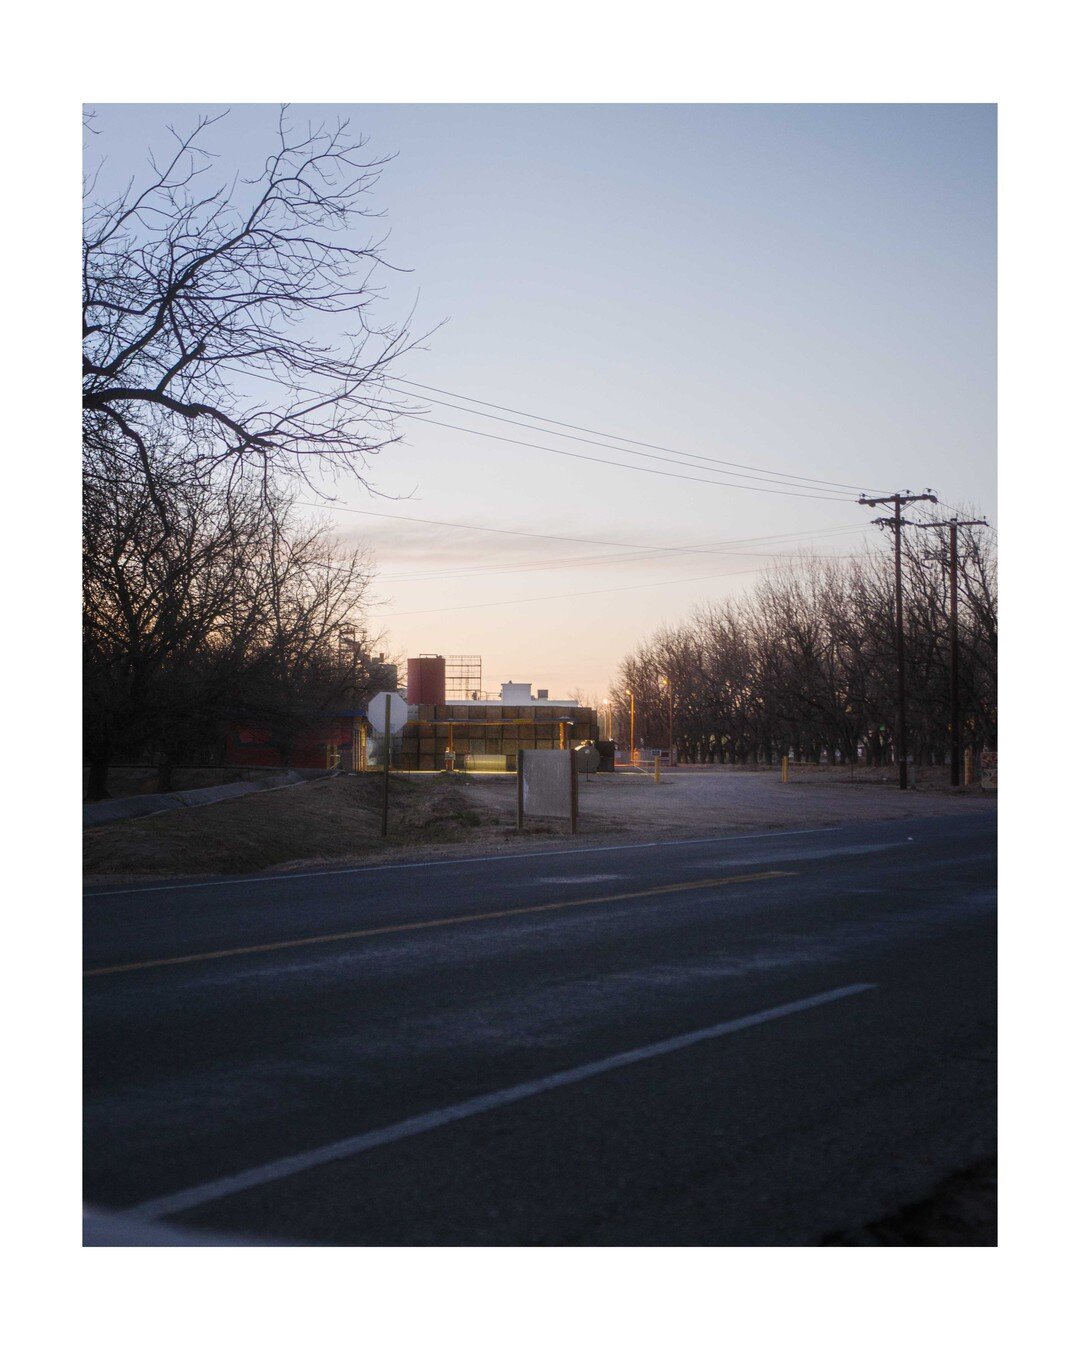 12-21-2020
I ended up at a pecan farm in New Mexico during a drive and the twilight felt so odd. 

The White Border Series is a series of unedited or very lightly edited photos that feel like re-discovered forgotten photos.

#WhiteBorderSeries #white